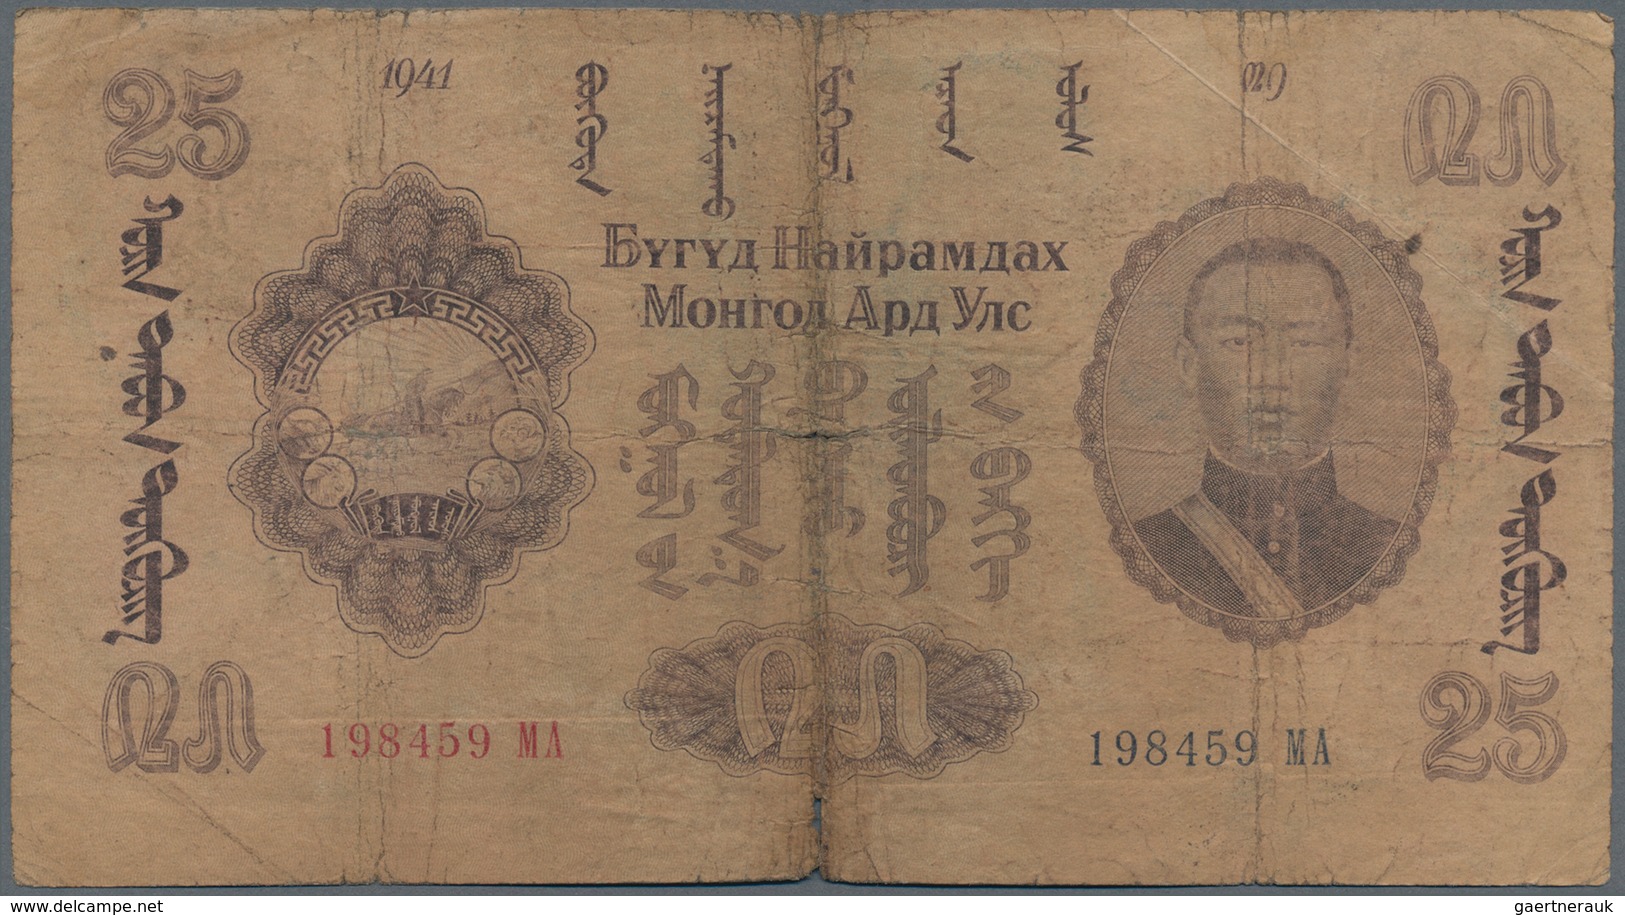 Mongolia / Mongolei: Nice and rare set with 4 Banknotes including 1 Tugrik 1939, 1, 10 and 25 Tugrik